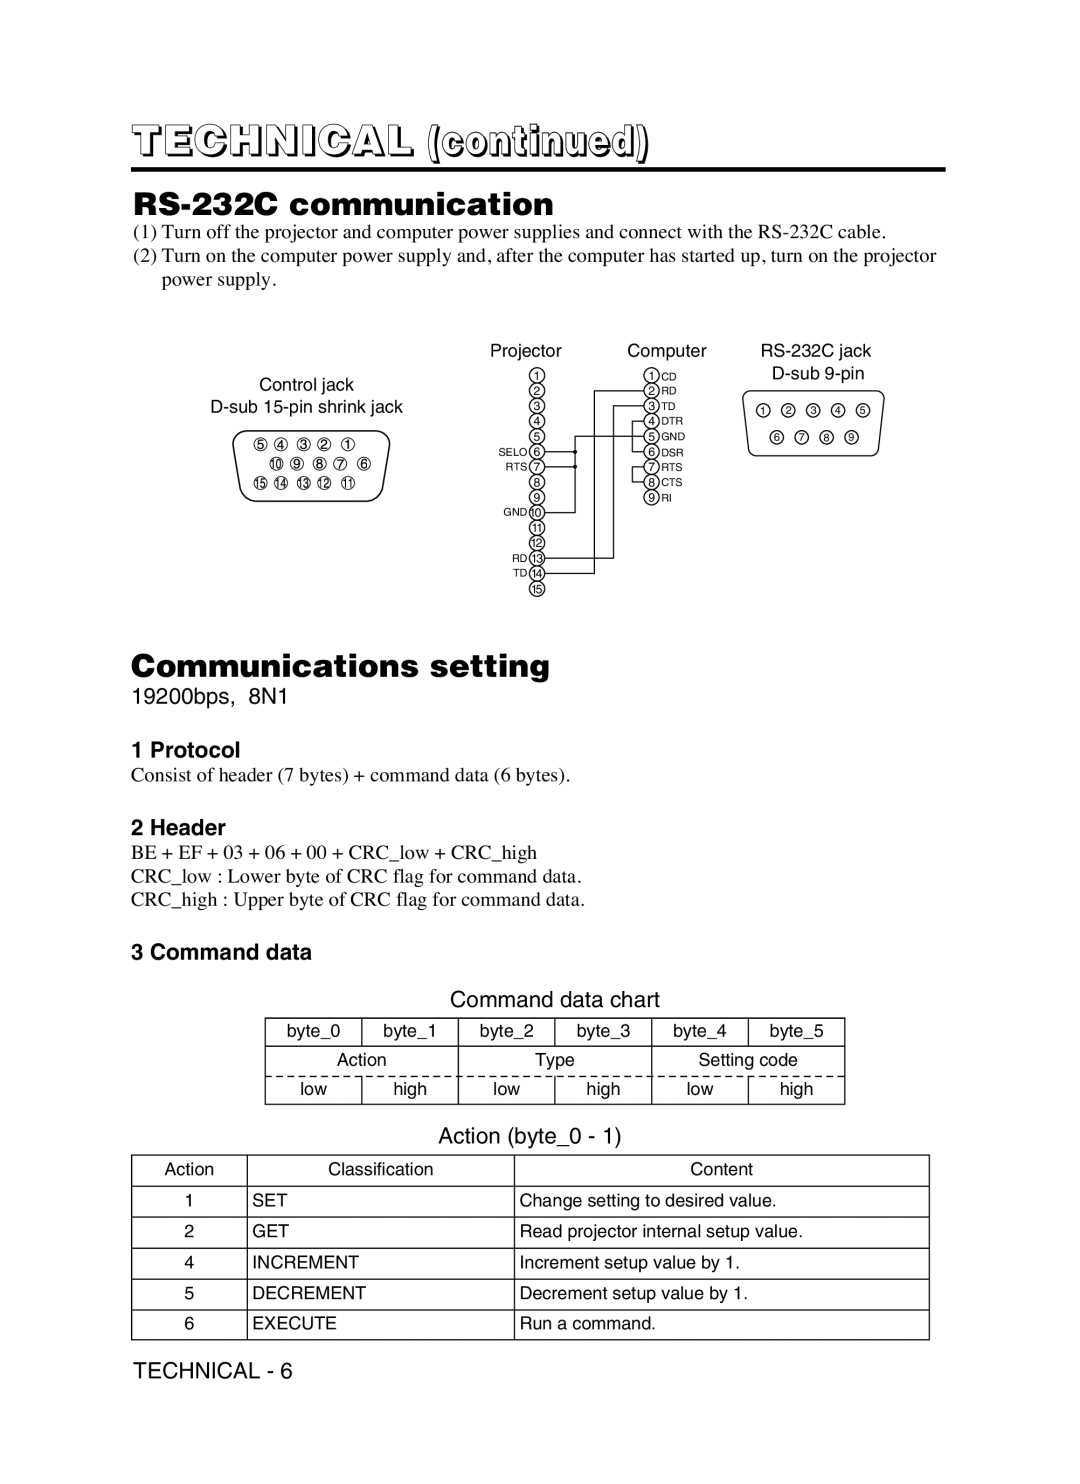 Dukane 8053 user manual RS-232C communication, Communications setting, Protocol, Header, Command data, TECHNICAL continued 